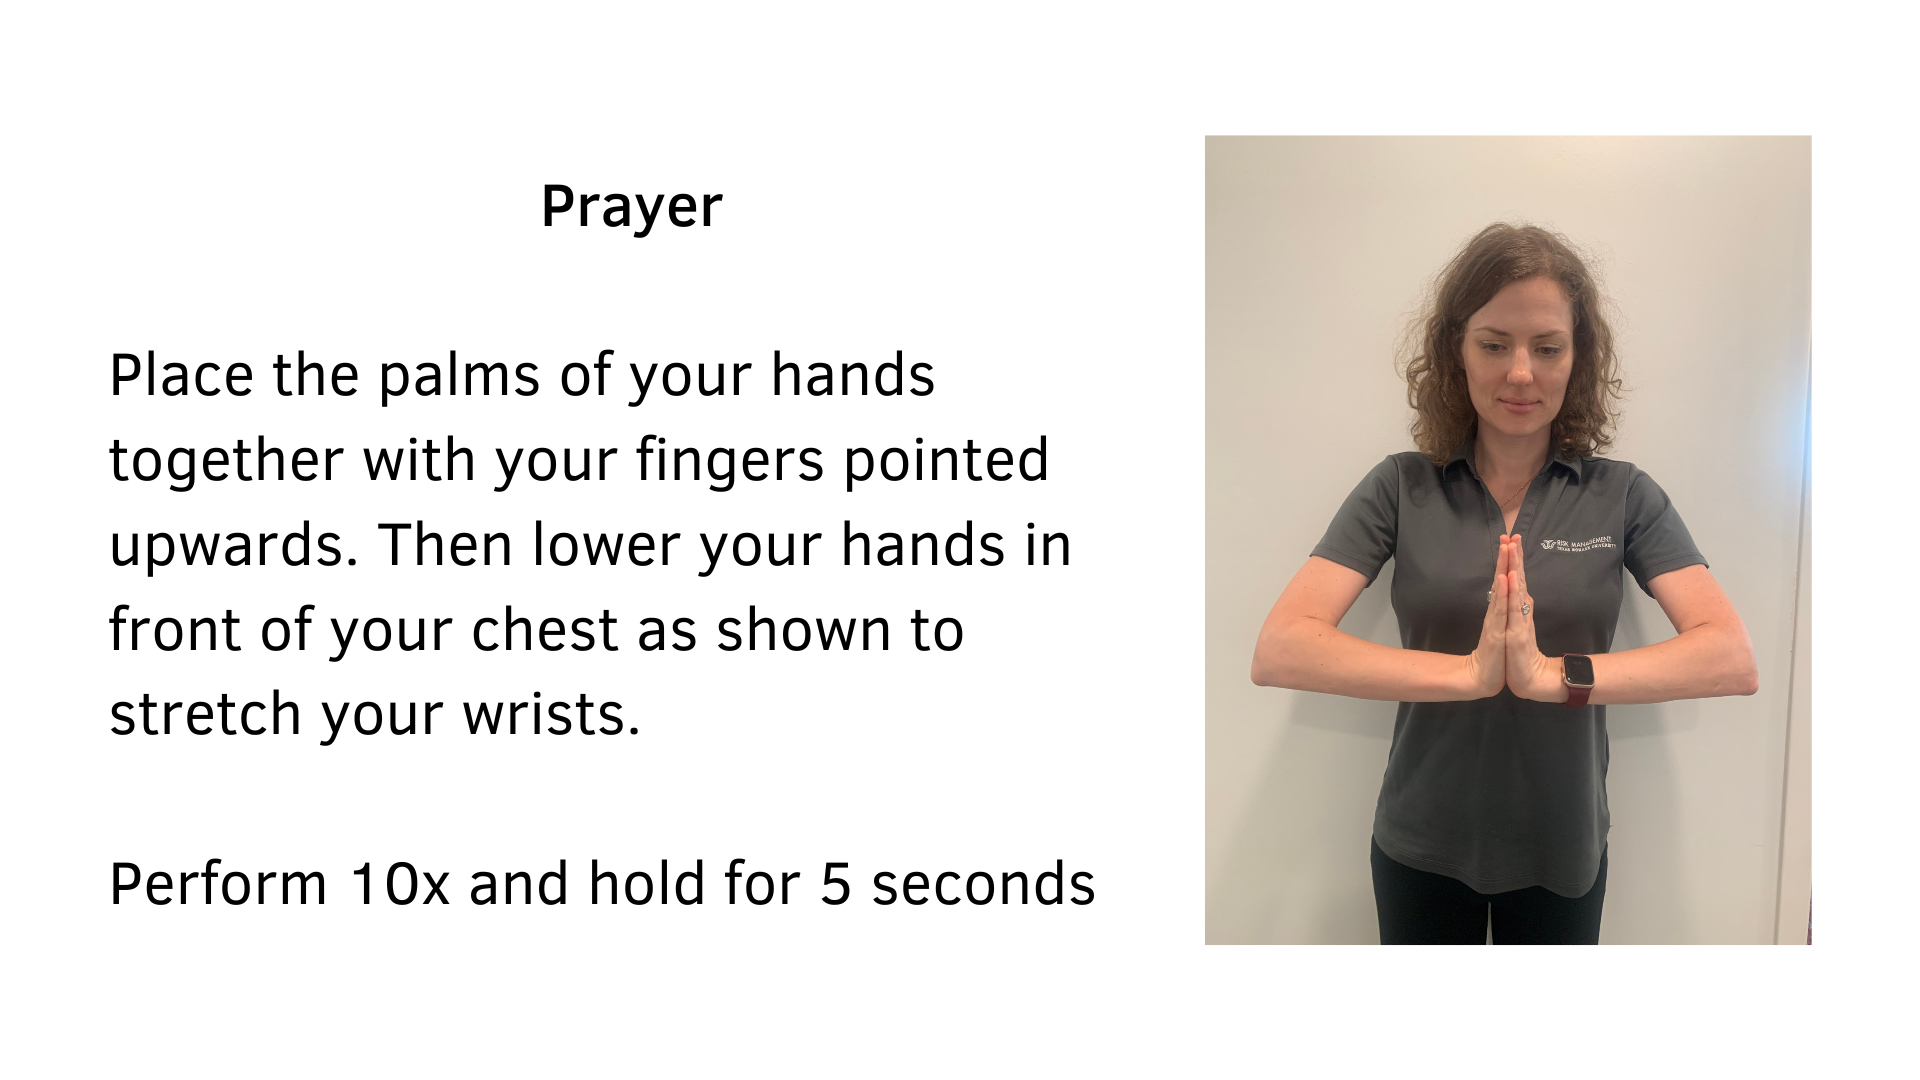 Black text on a white background that reads, "Prayer: Place the palms of your hands together with your fingers pointed upwards. Then lower your hands in front of your chest as shown to stretch your wrists. Perform 10x and hold for 5 seconds". A picture of a woman demonstrating the stretch is featured.